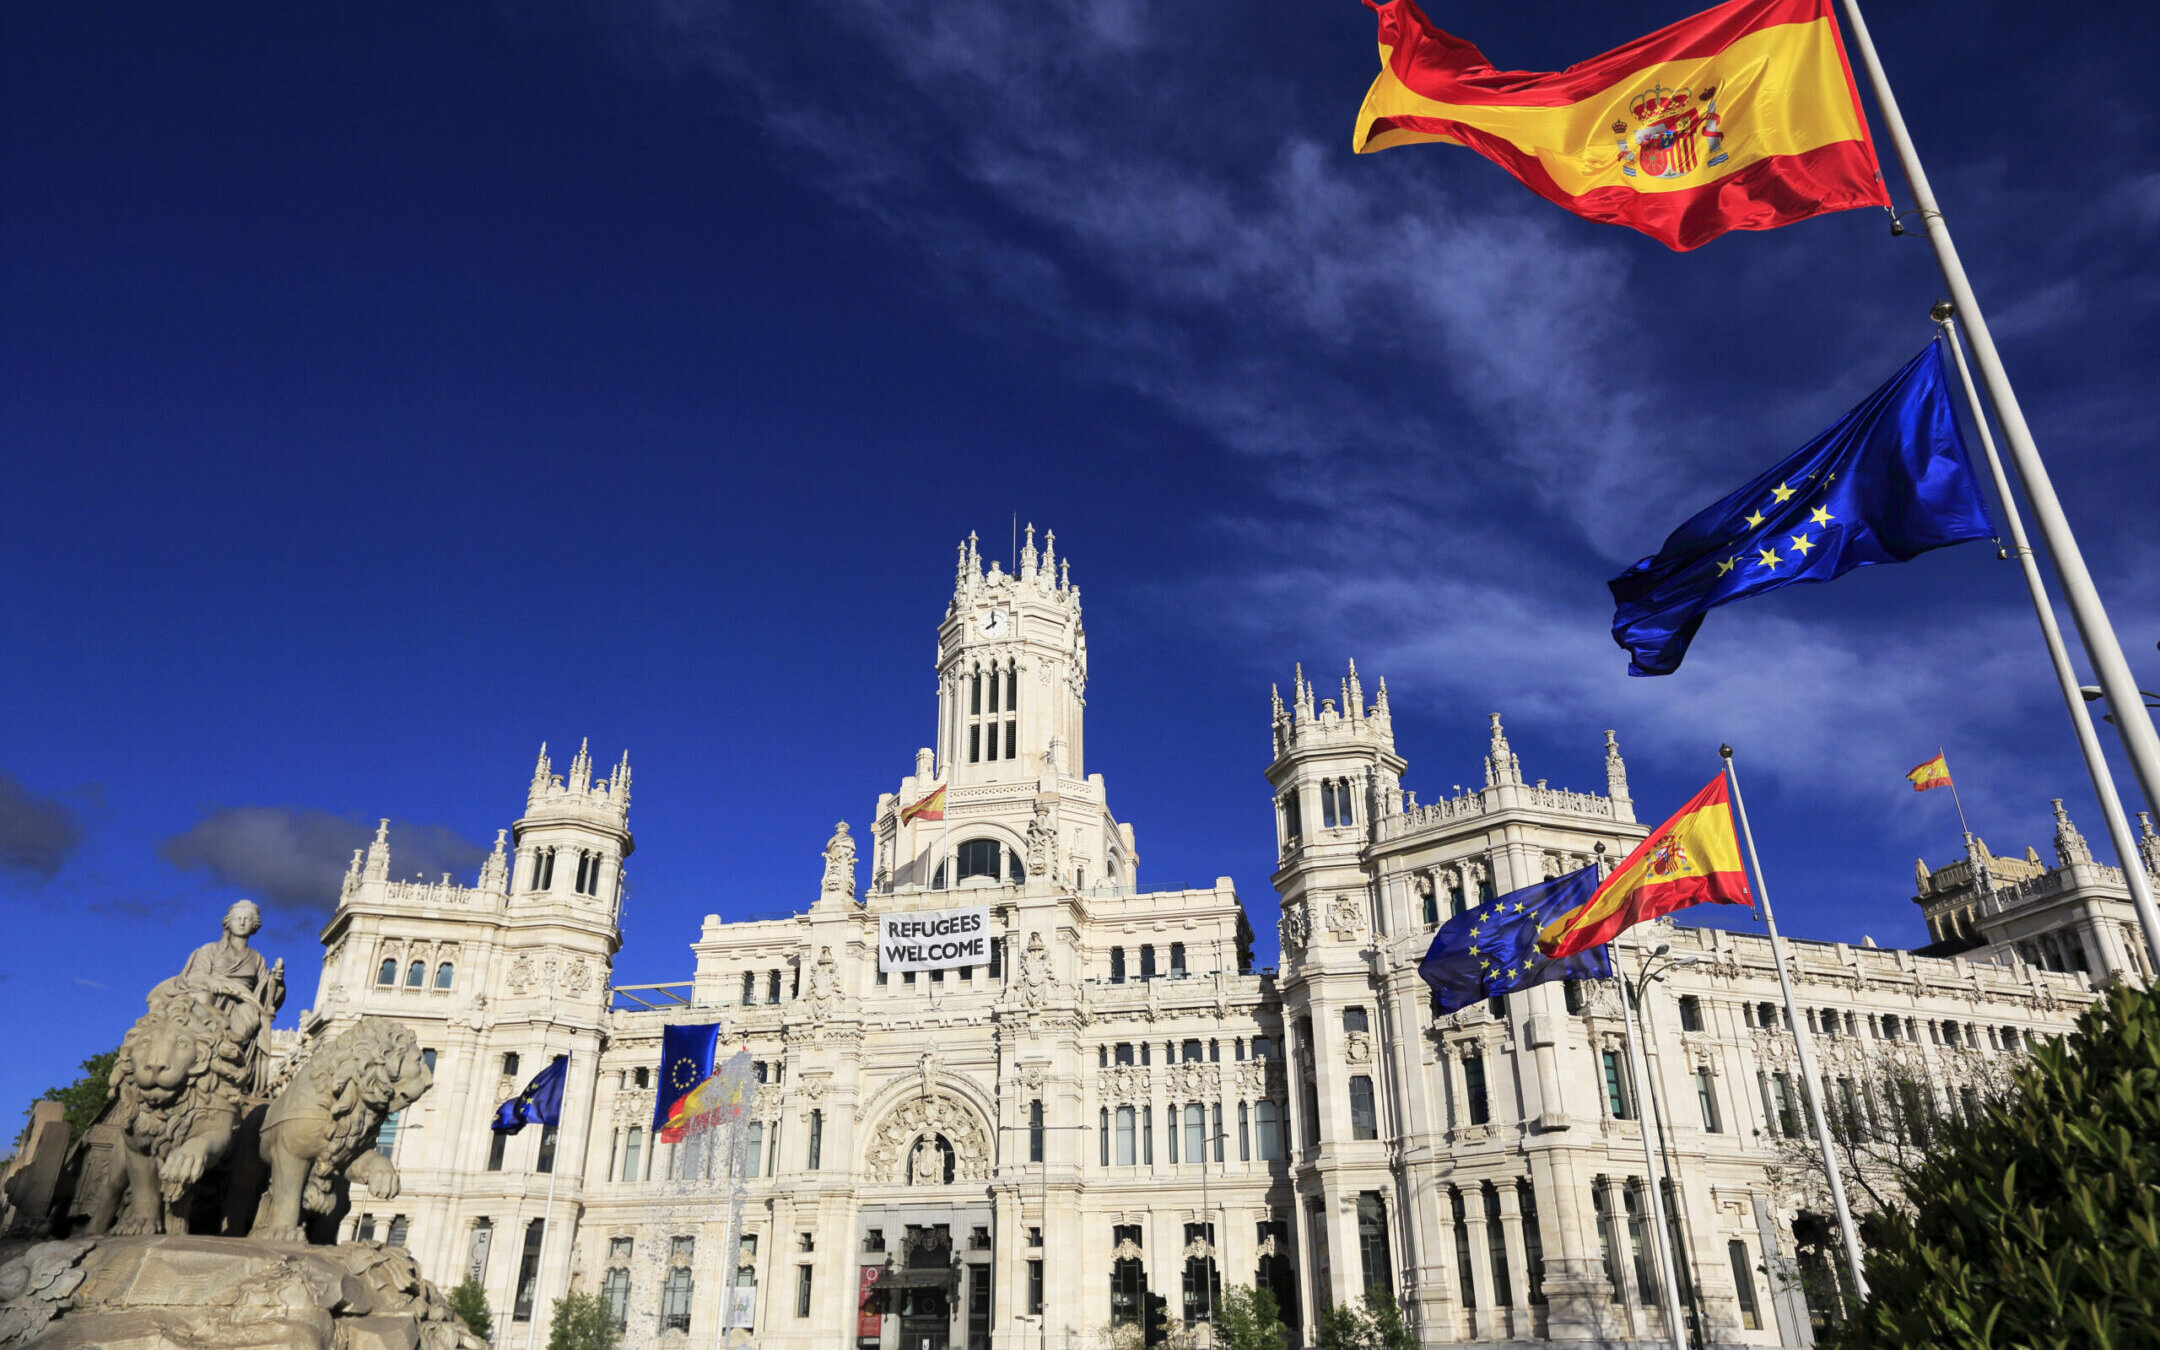 Cybele Palace, the Madrid City Hall, on Cibeles Square with the Cibeles Fountain,Spanish and EU flags in foreground. (Getty Images)